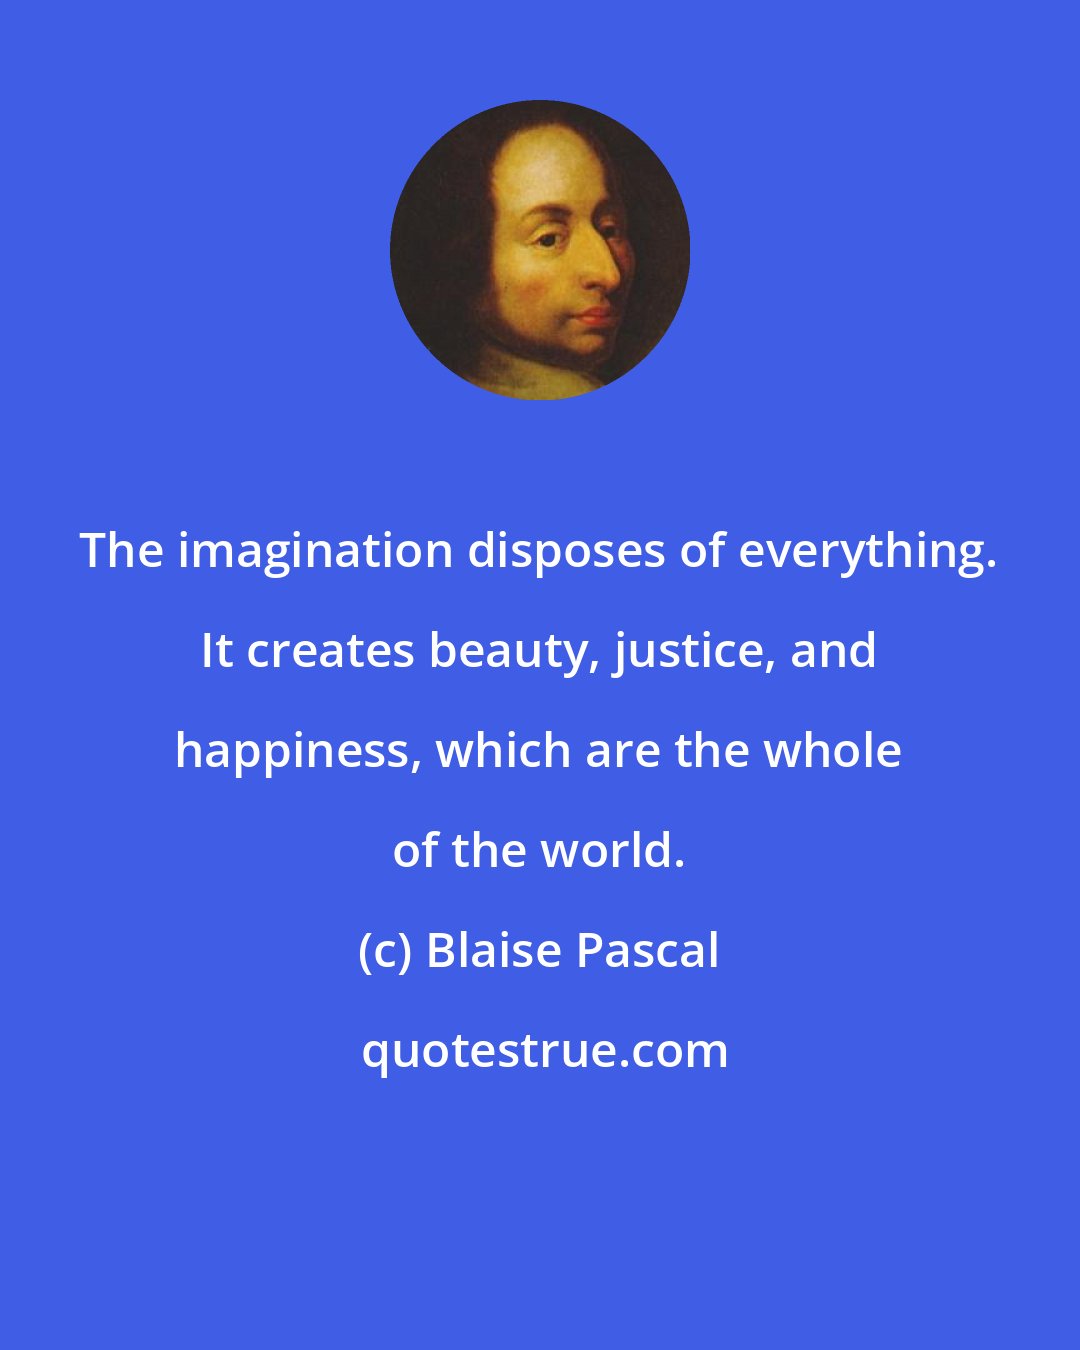 Blaise Pascal: The imagination disposes of everything. It creates beauty, justice, and happiness, which are the whole of the world.